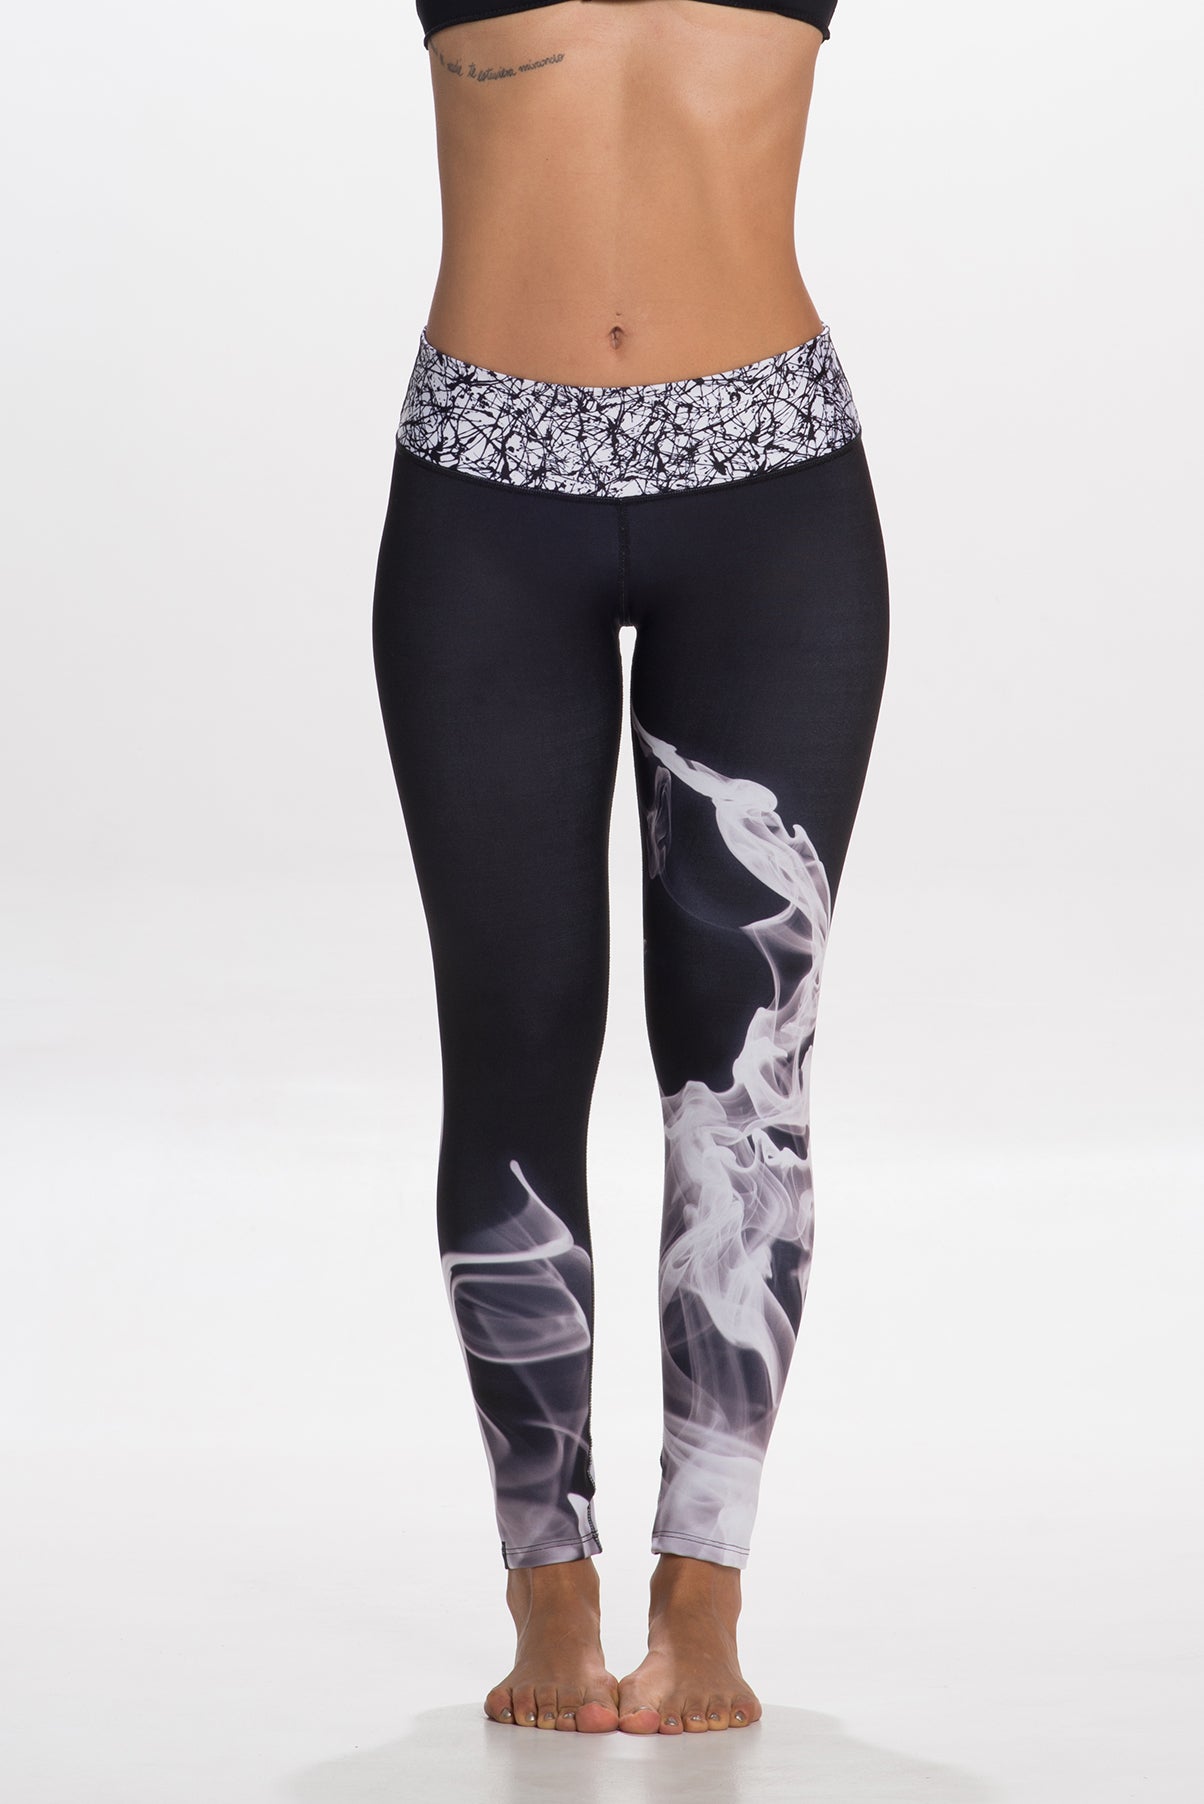 Active lifestyle and compression wear - Bestyfit